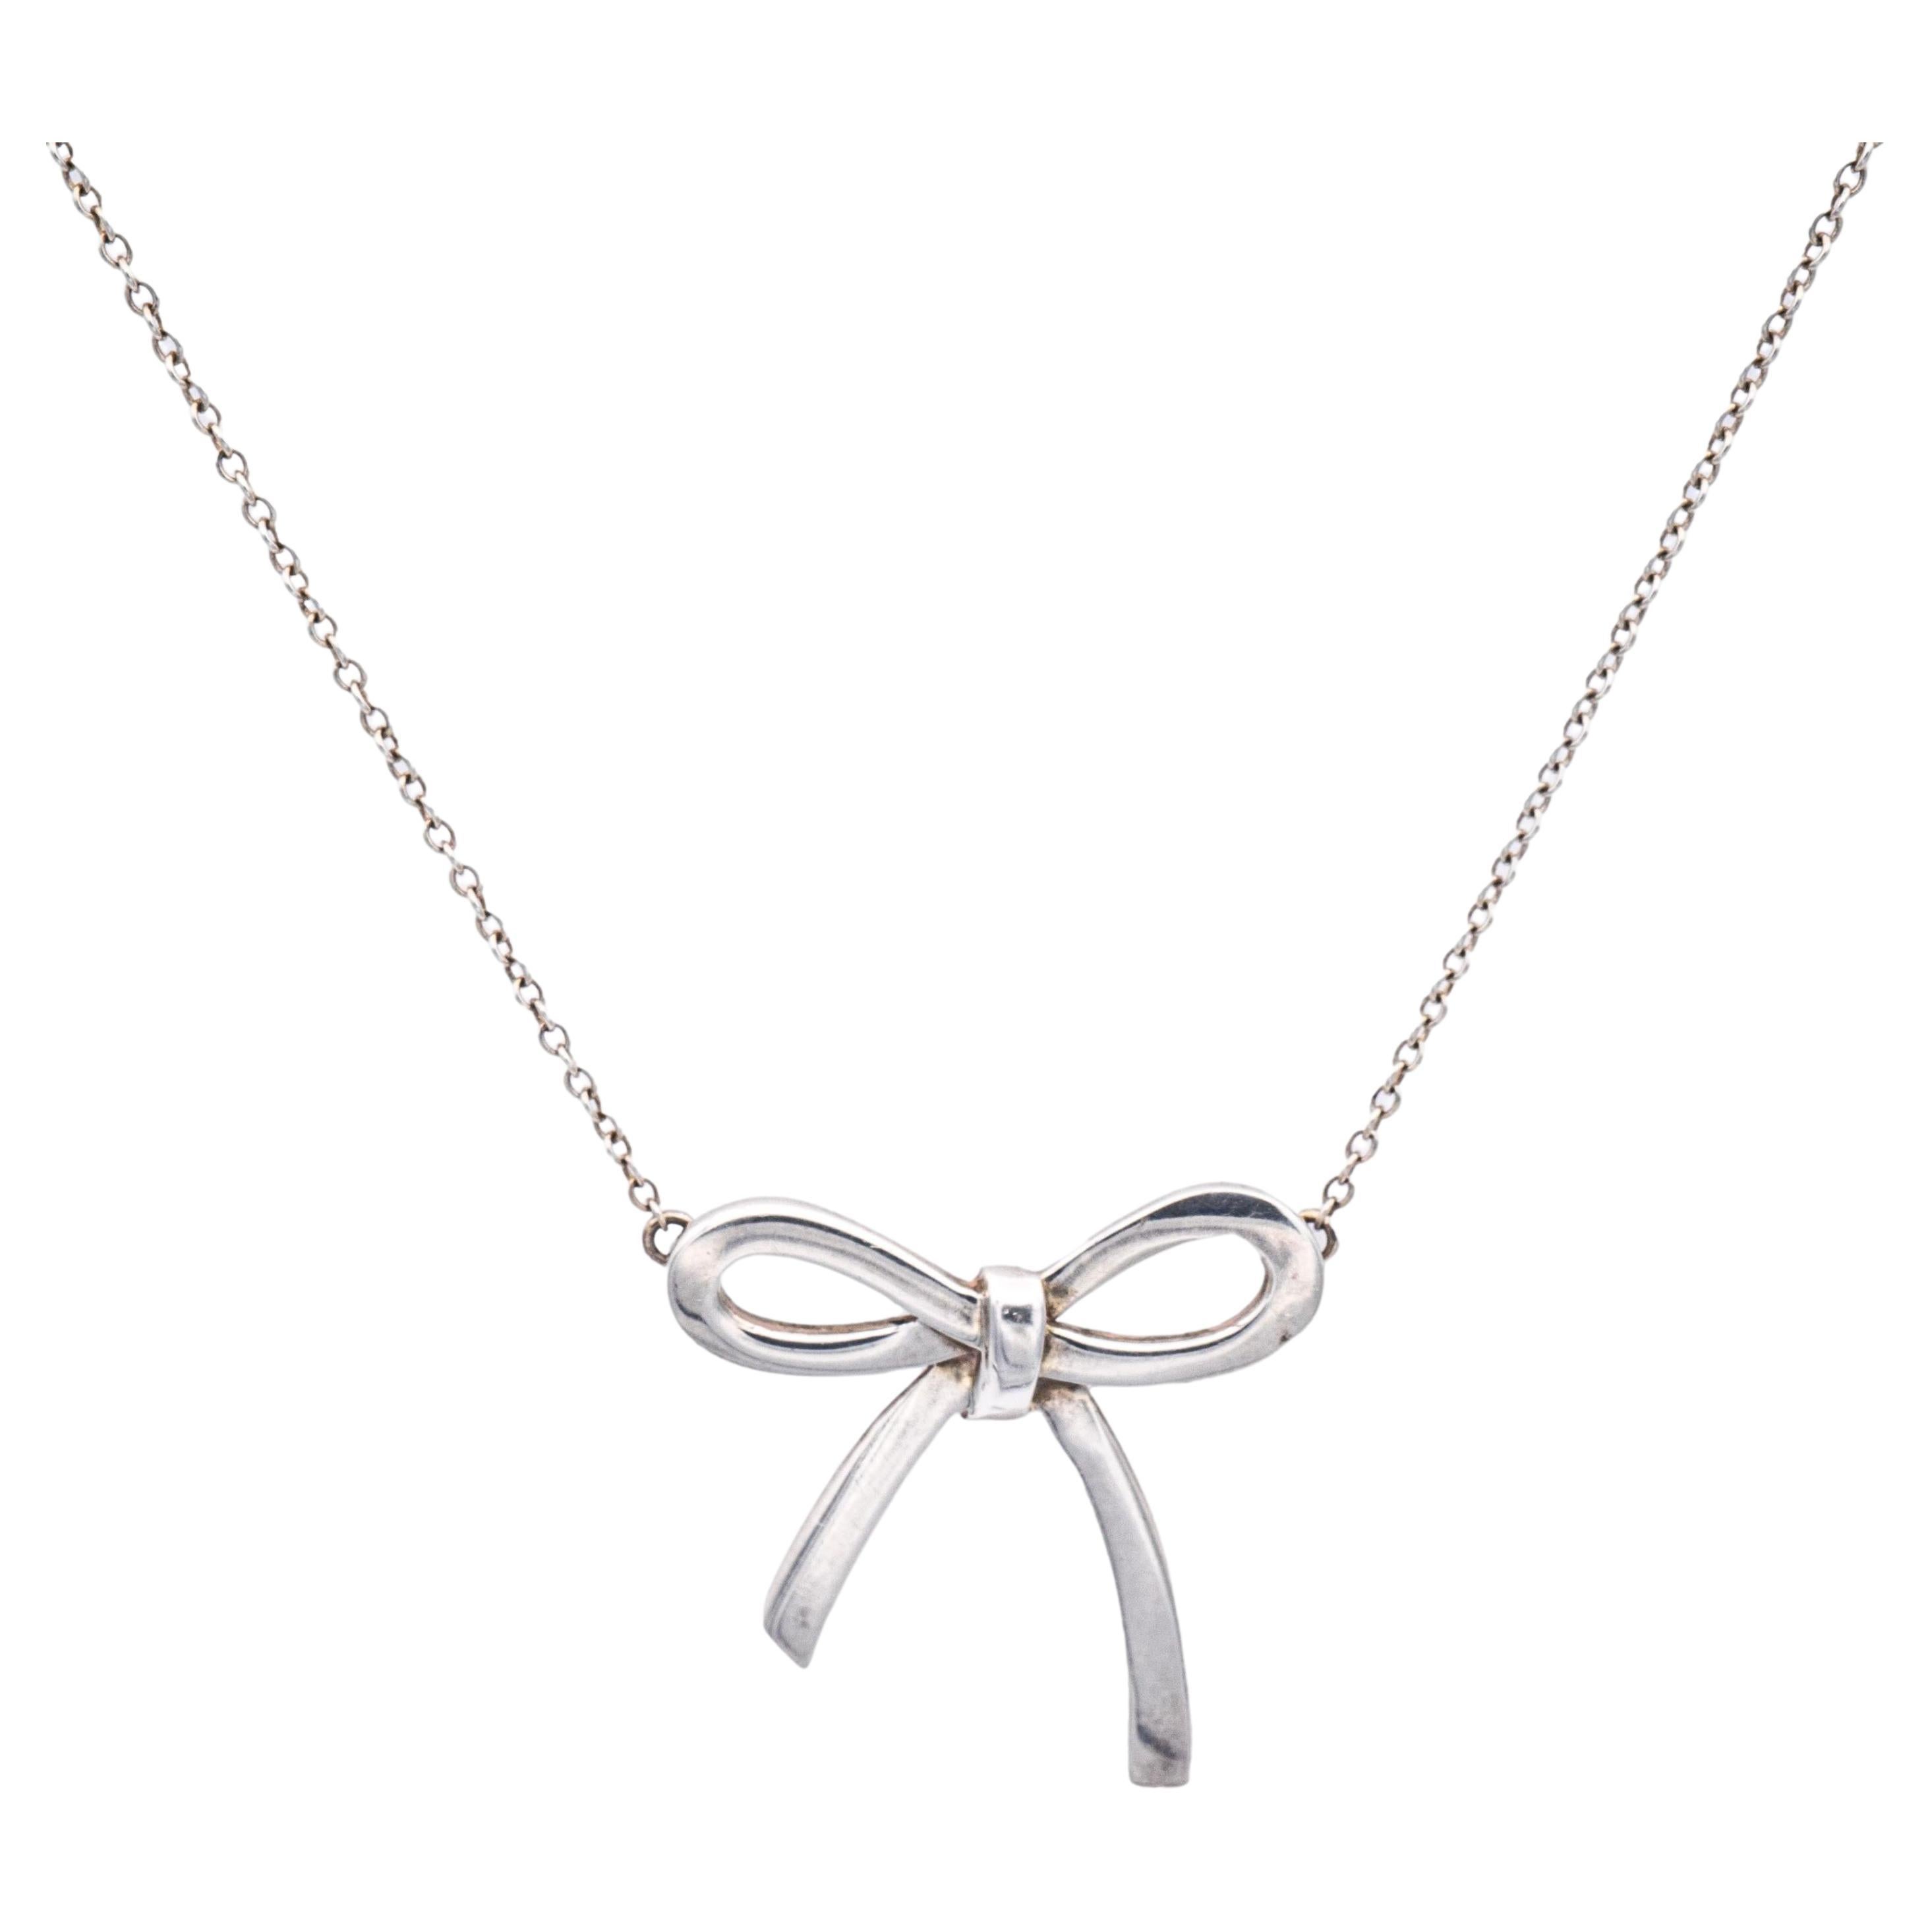 Buy Tiffany Ribbon Bow Necklace White Sterling Silver 24988074 For